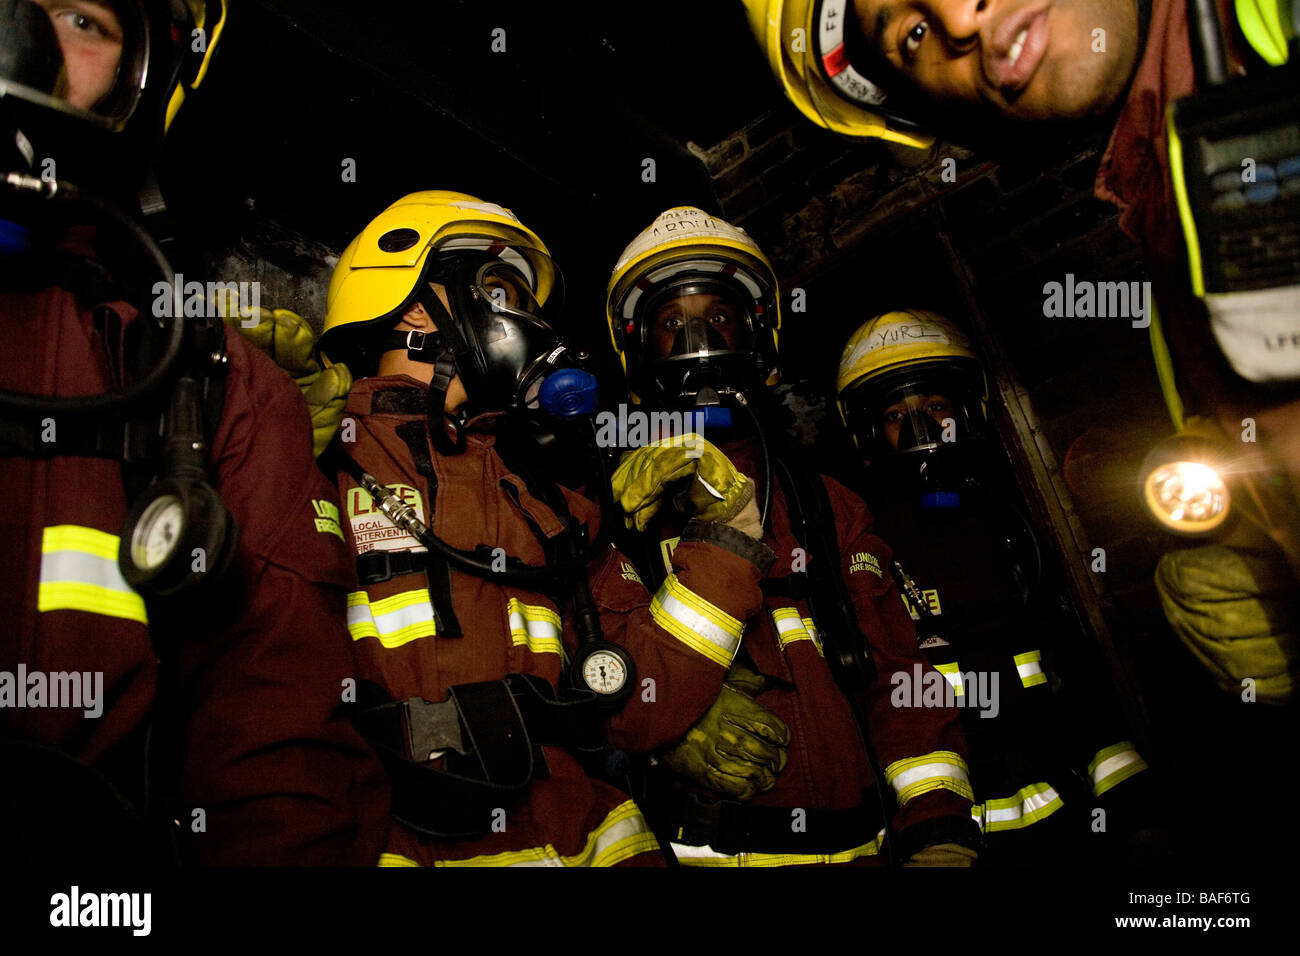 Youth offenders on fire brigade training course Stock Photo